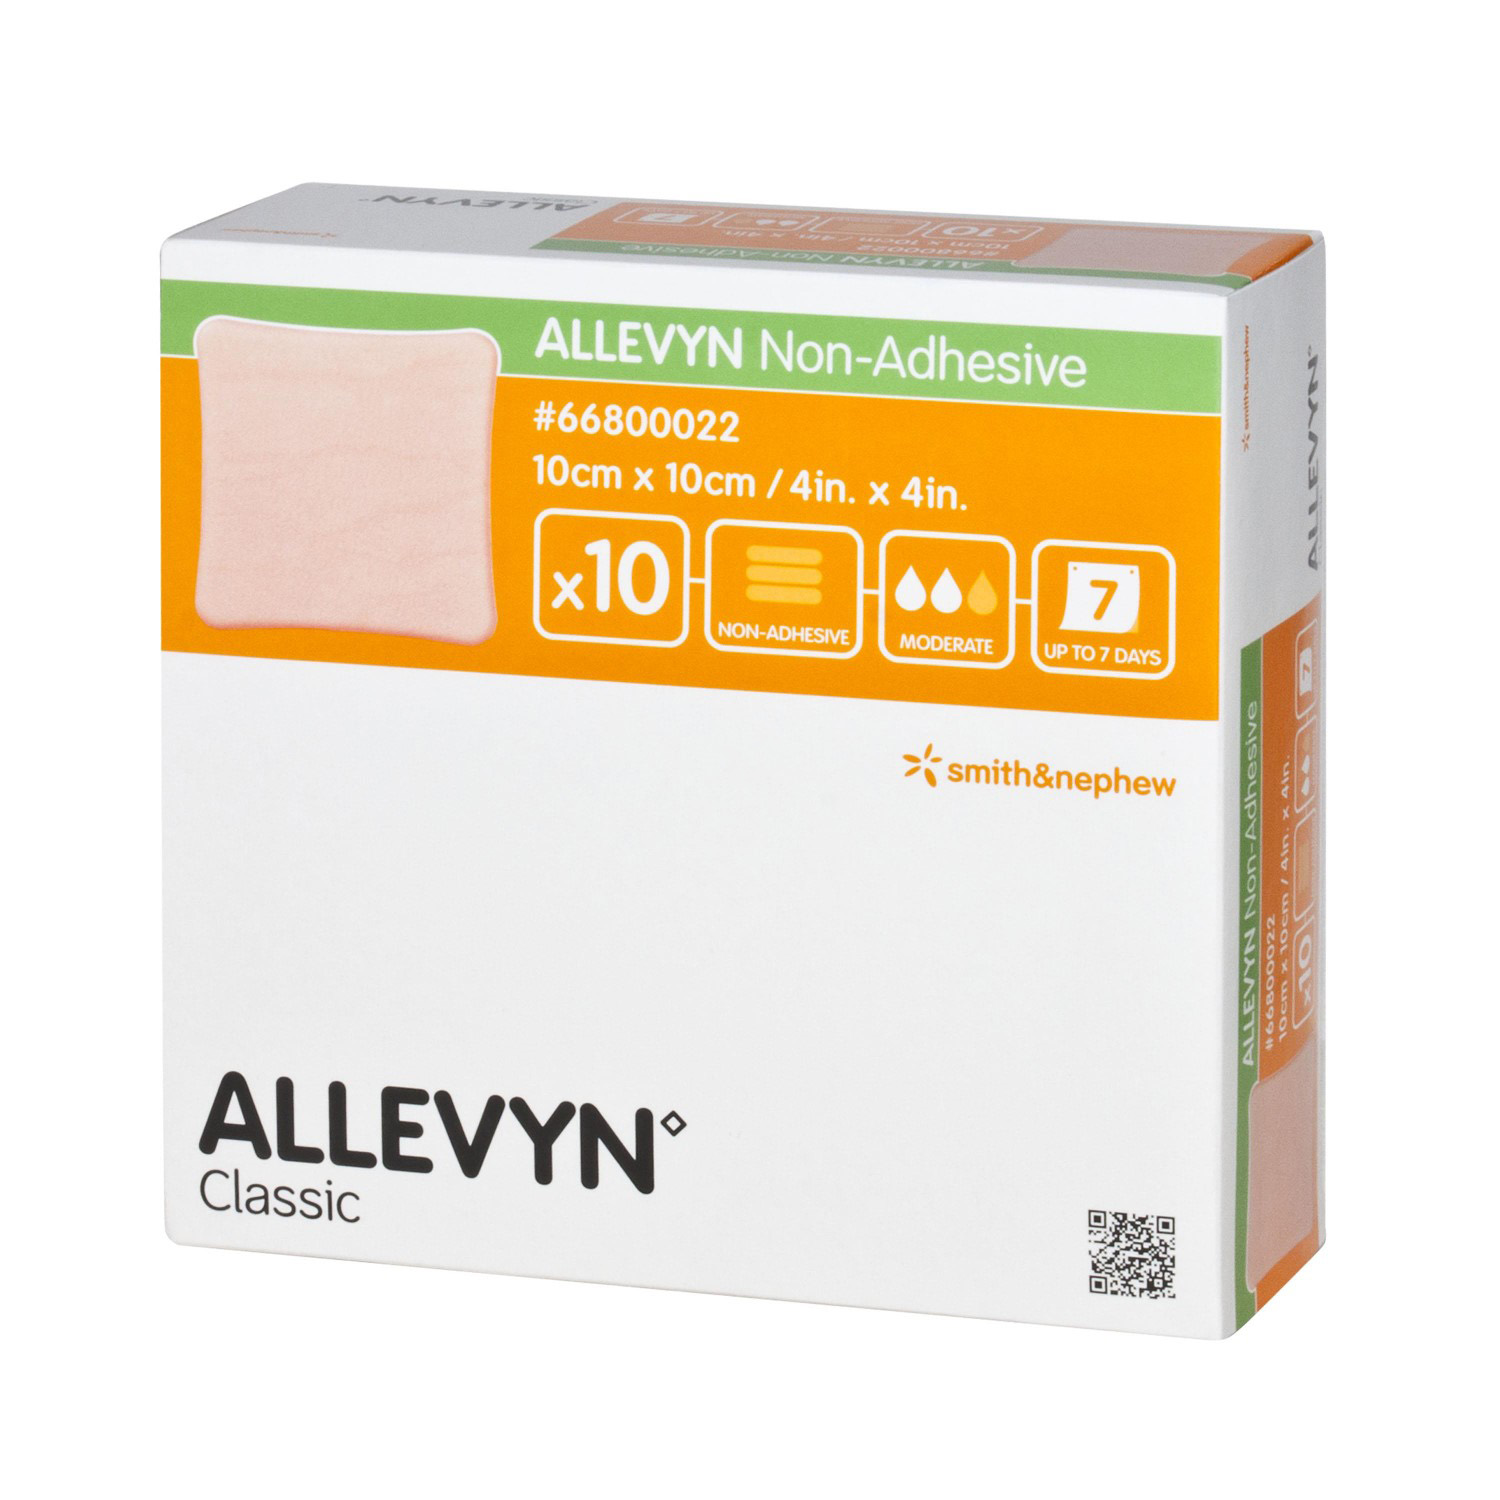 Allevyn - absorberend hydrocellulair verband - 10 x 10 cm - 10 st